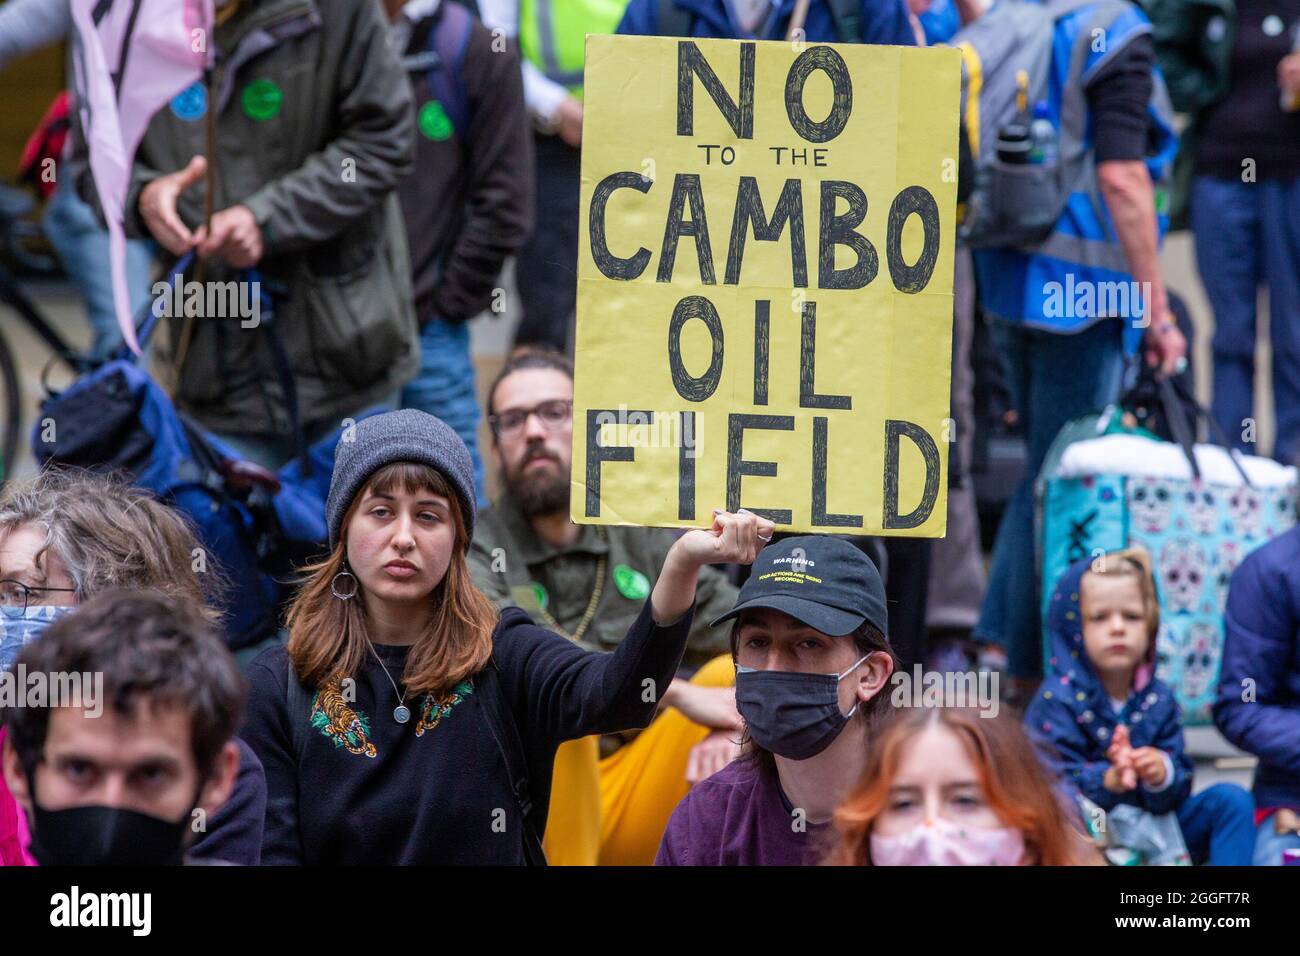 London, UK. 30th Aug, 2021. London, UK 30 8 21 No to the Cambo Oil field placard. Members of Extinction Rebellion march from The Shard to Tower Bridge where supporters climb on top of a caravan and block the road. Extinction Rebellion Credit: Mark Thomas/Alamy Live News Stock Photo